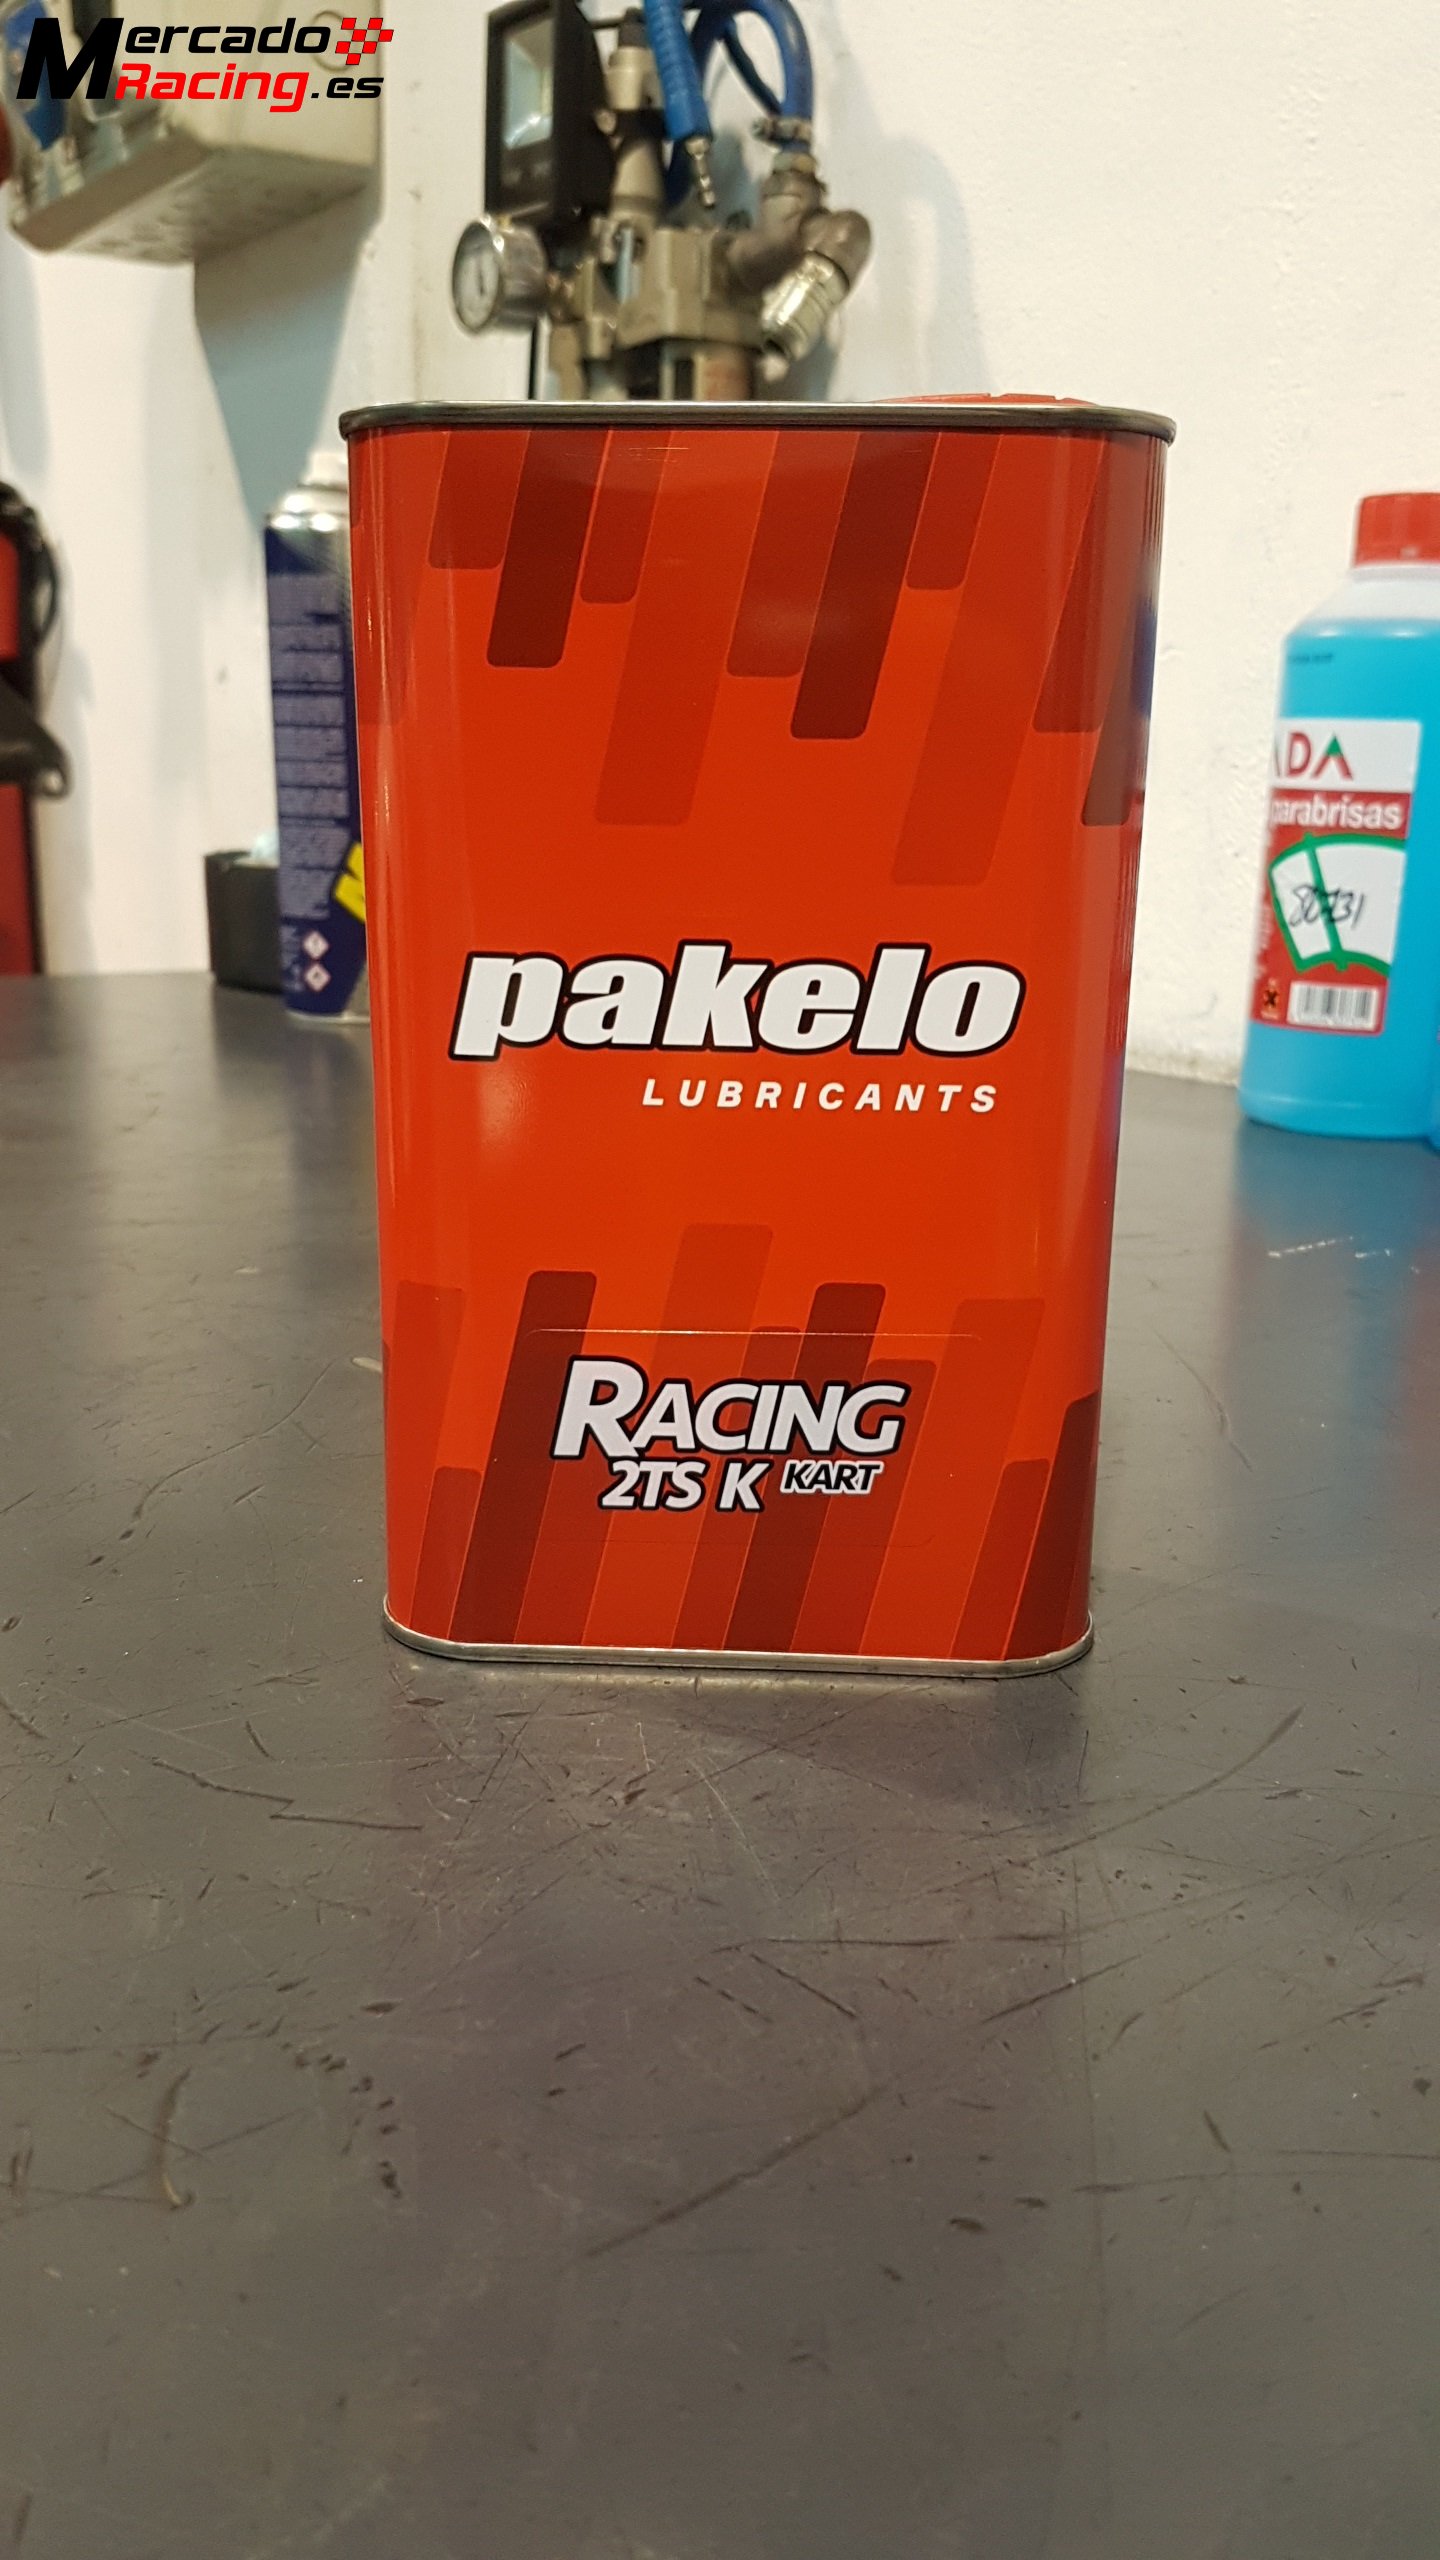 Aceite pakelo 2t